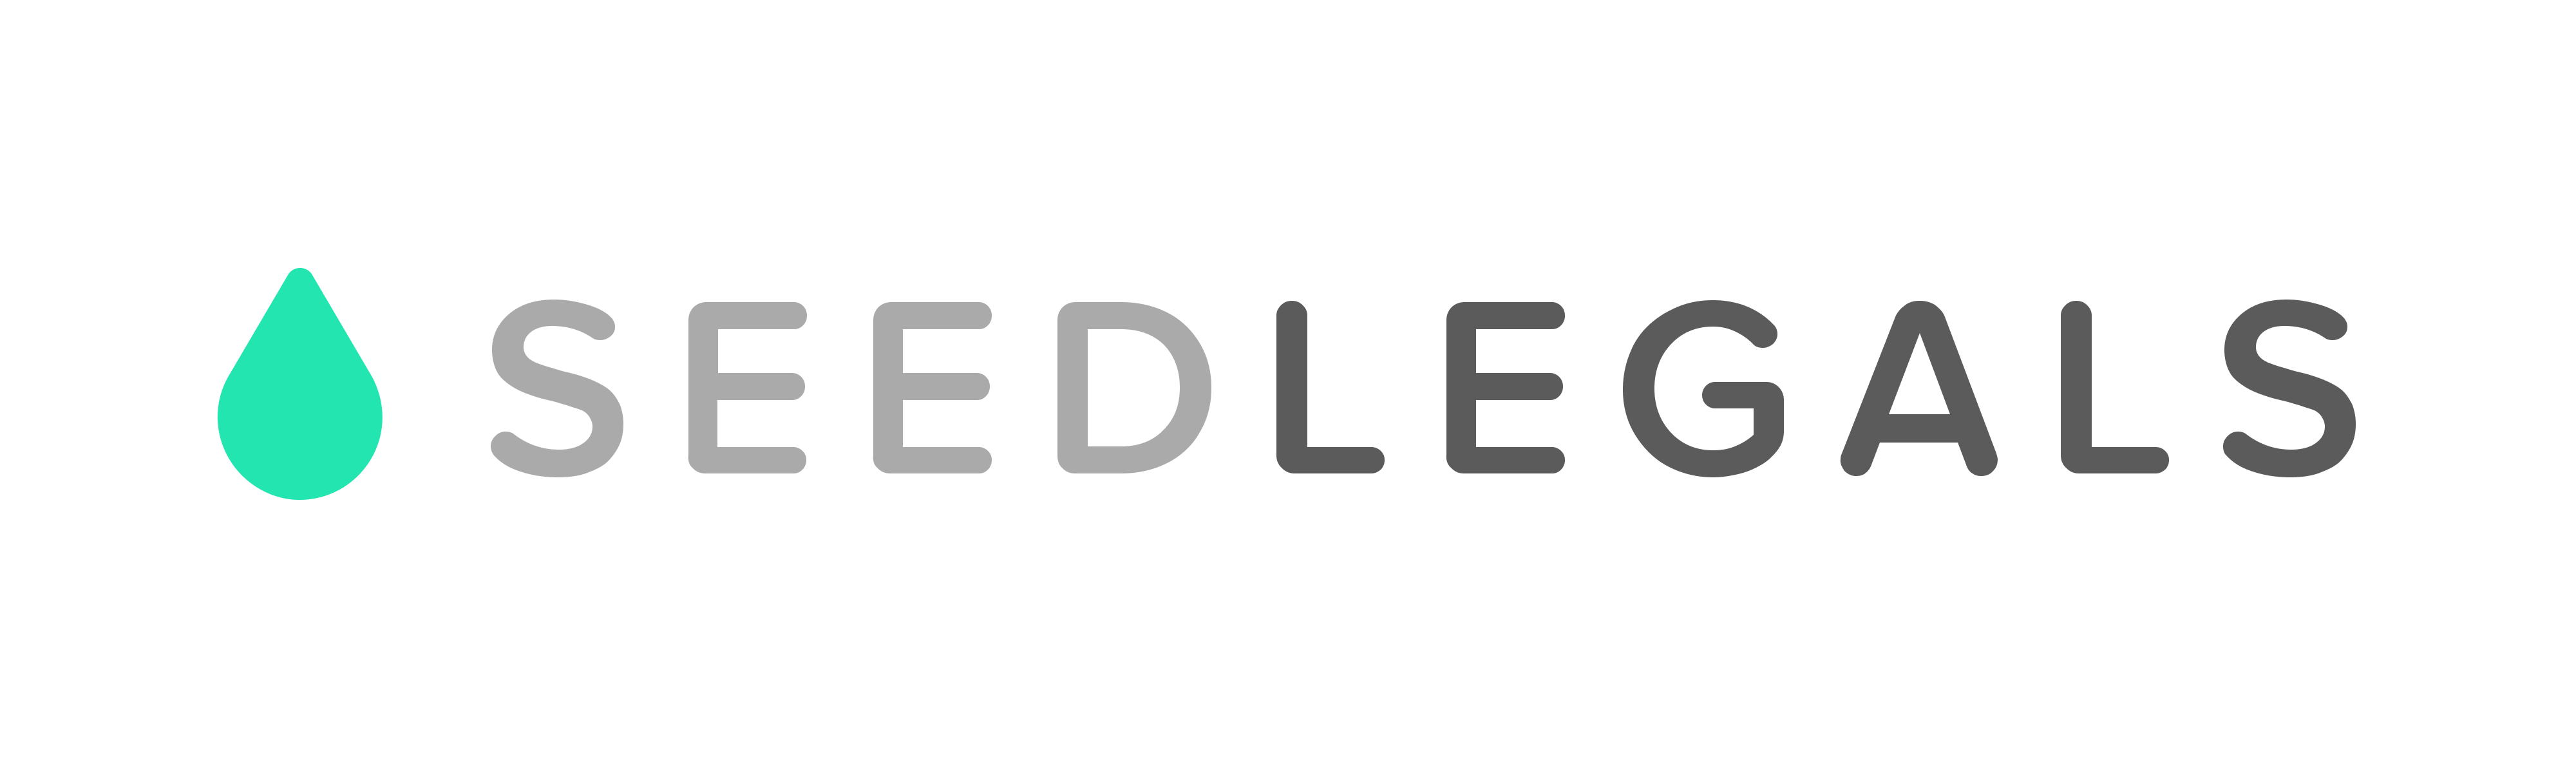 Seed Legals Logo